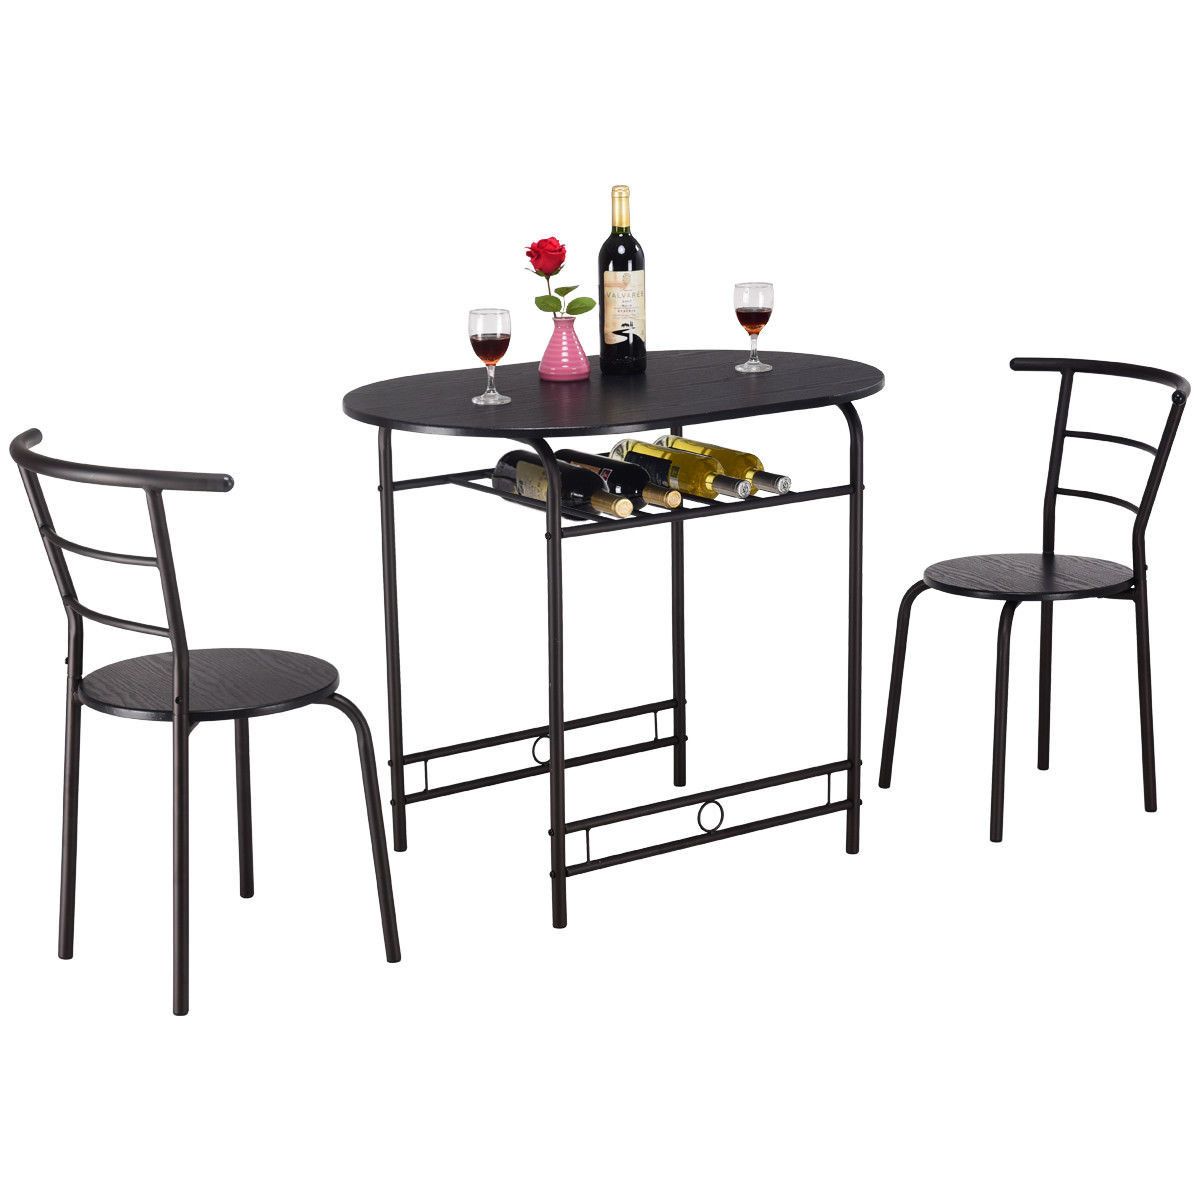 Hassinger 3 Piece Dining Set With Best And Newest Honoria 3 Piece Dining Sets (View 2 of 20)